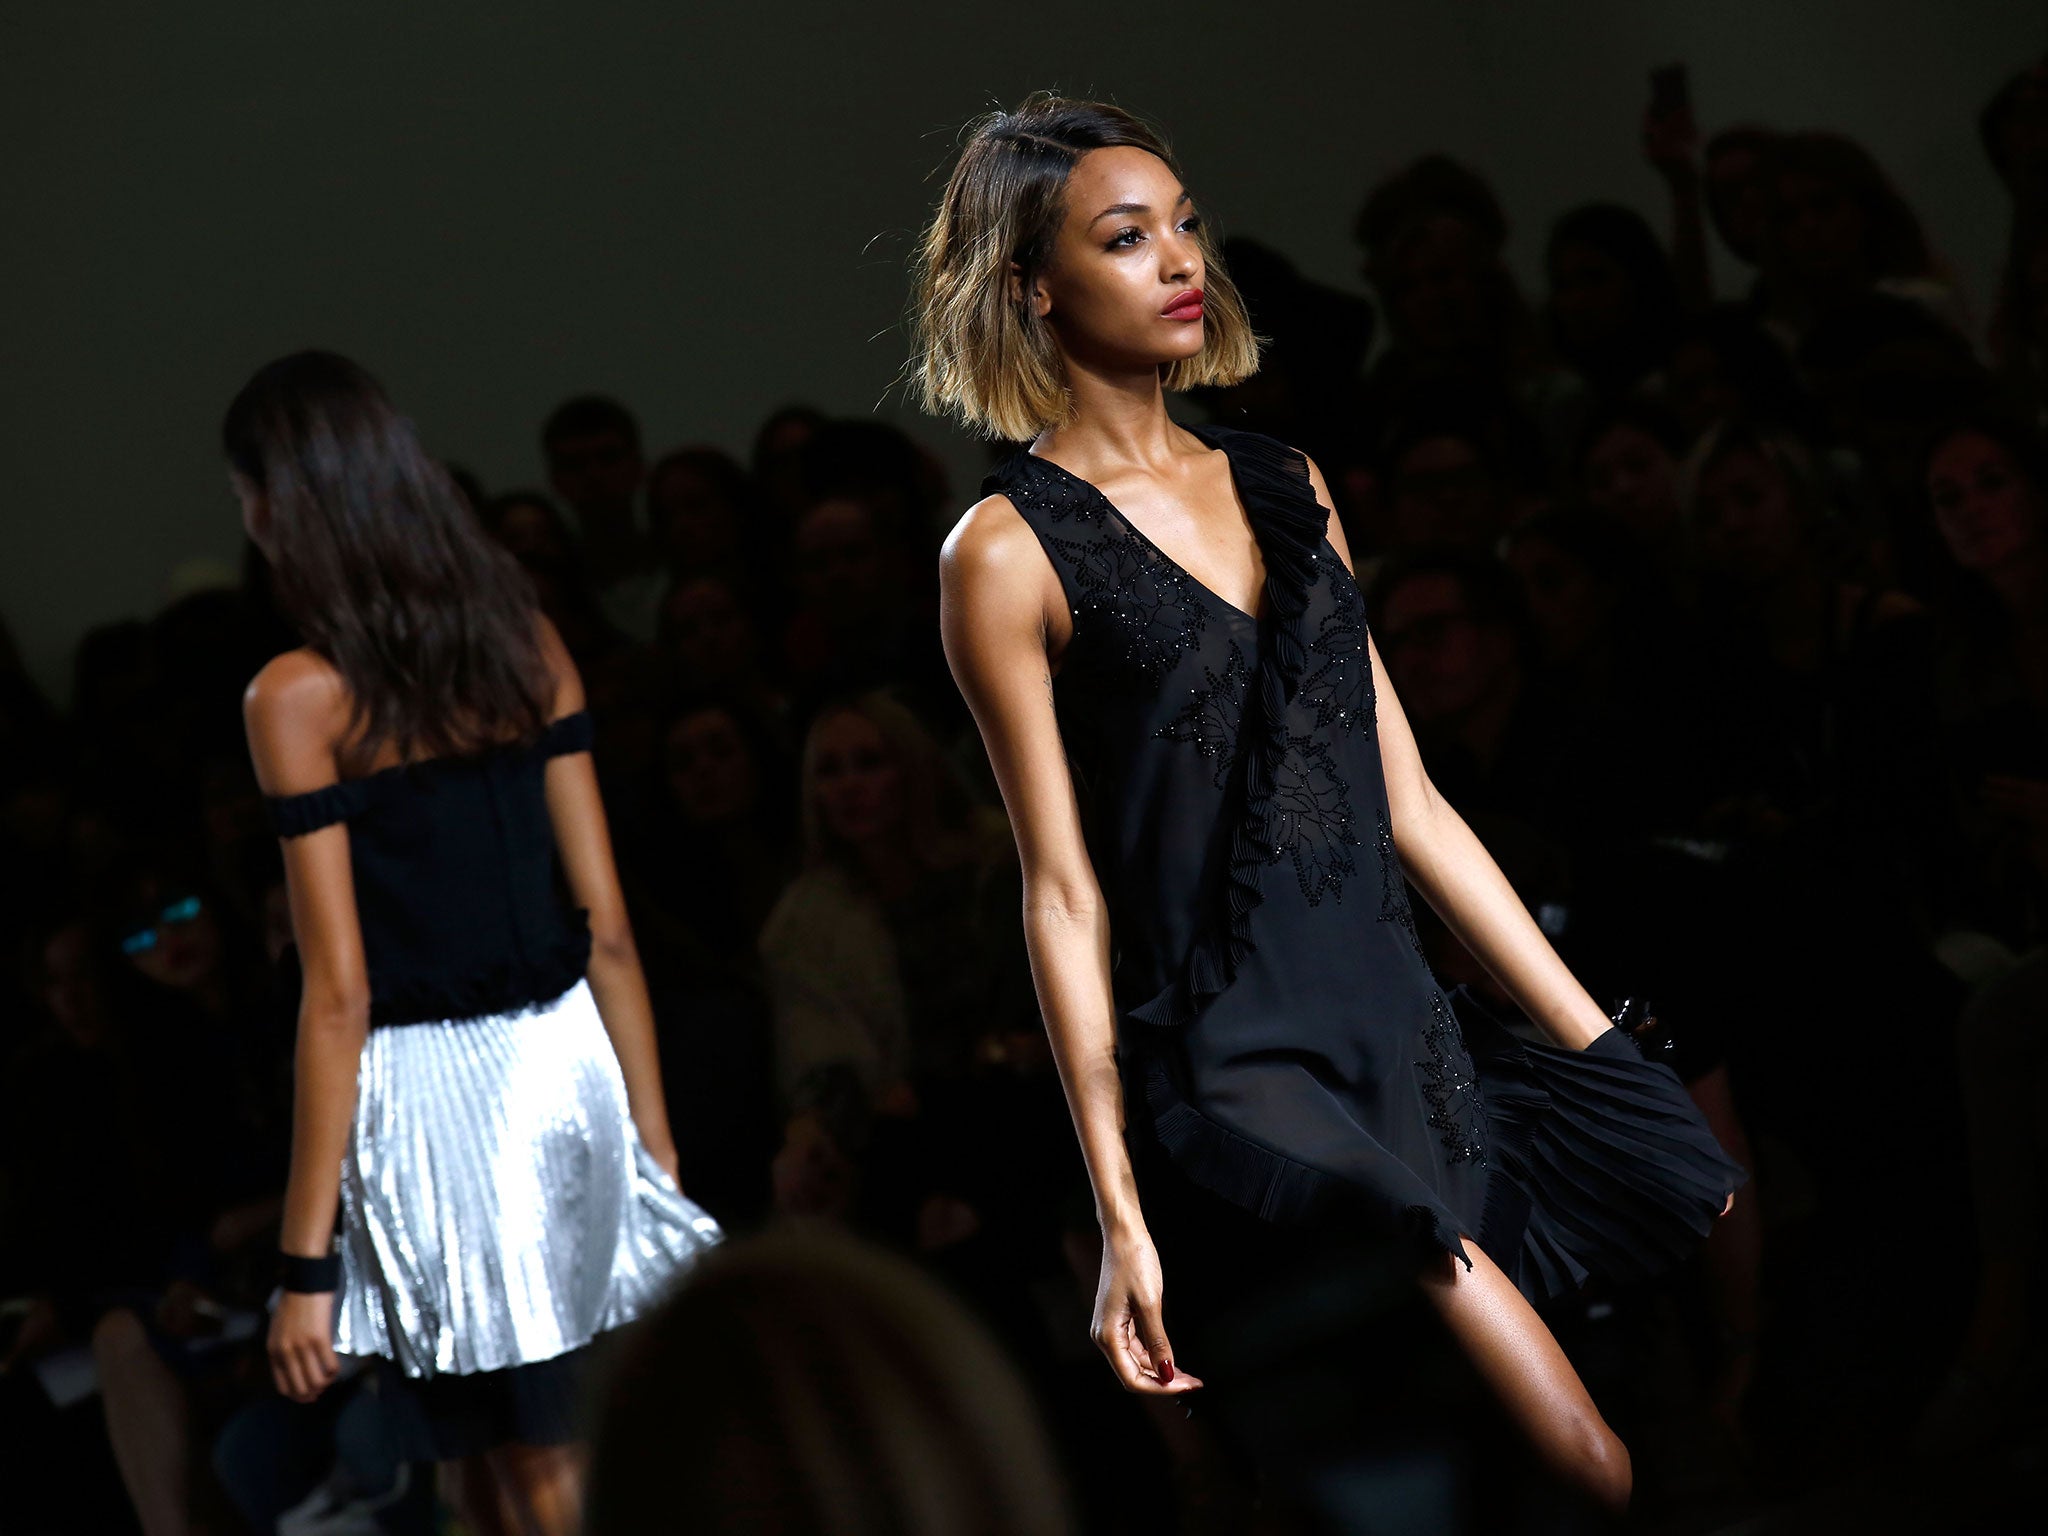 Jourdan Dunn gave TopShop’s Unique show some added glamour at London Fashion Week